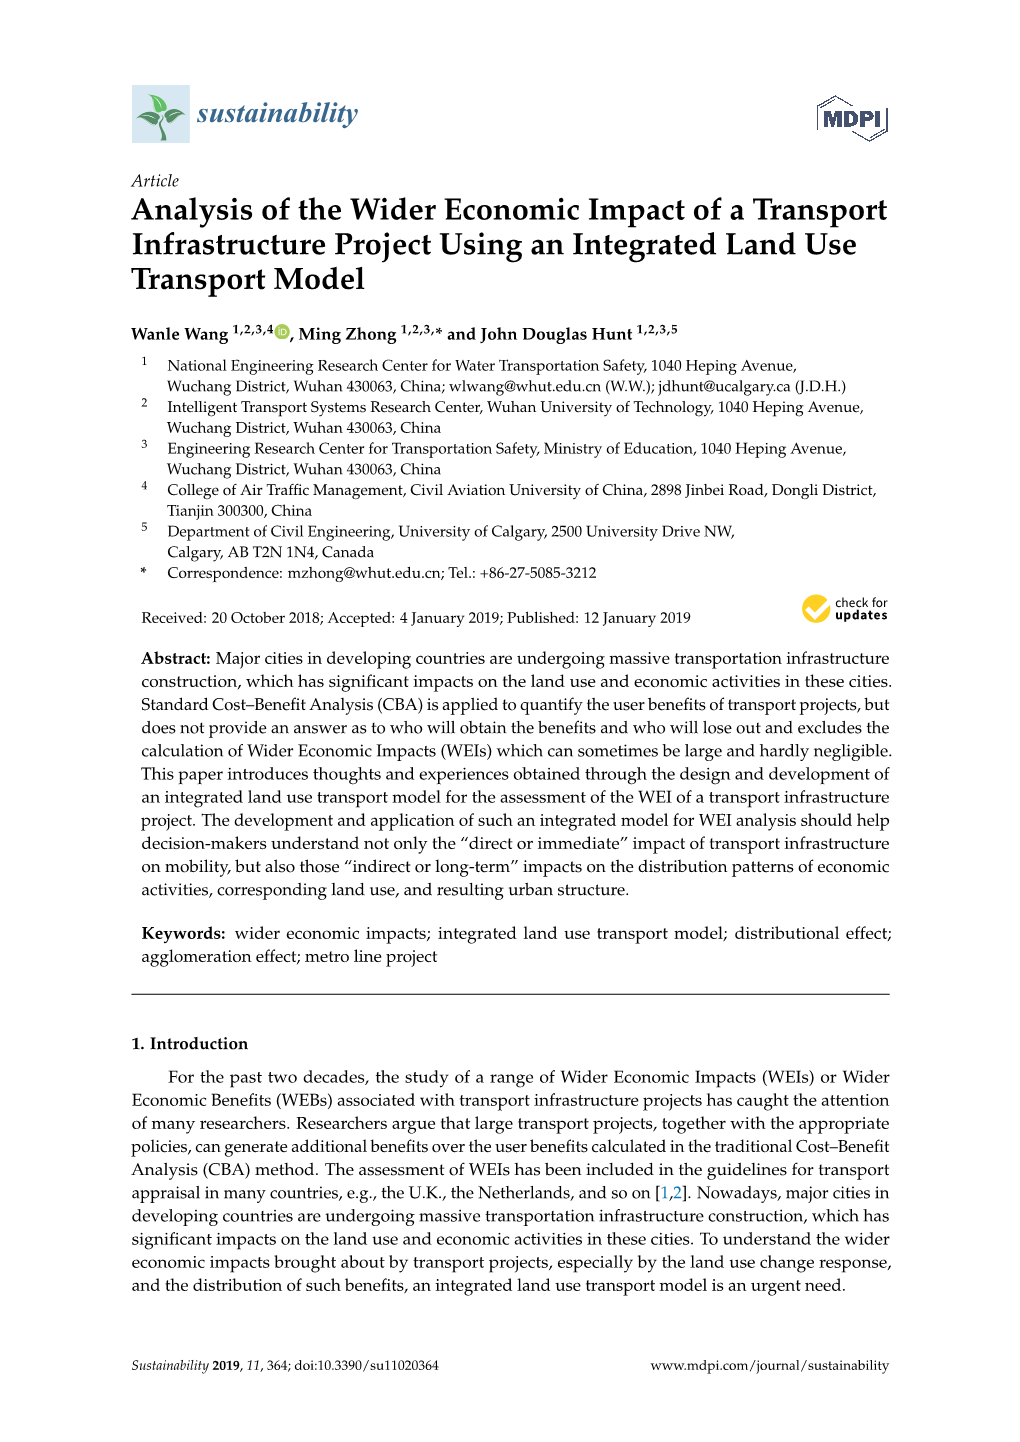 Analysis of the Wider Economic Impact of a Transport Infrastructure Project Using an Integrated Land Use Transport Model